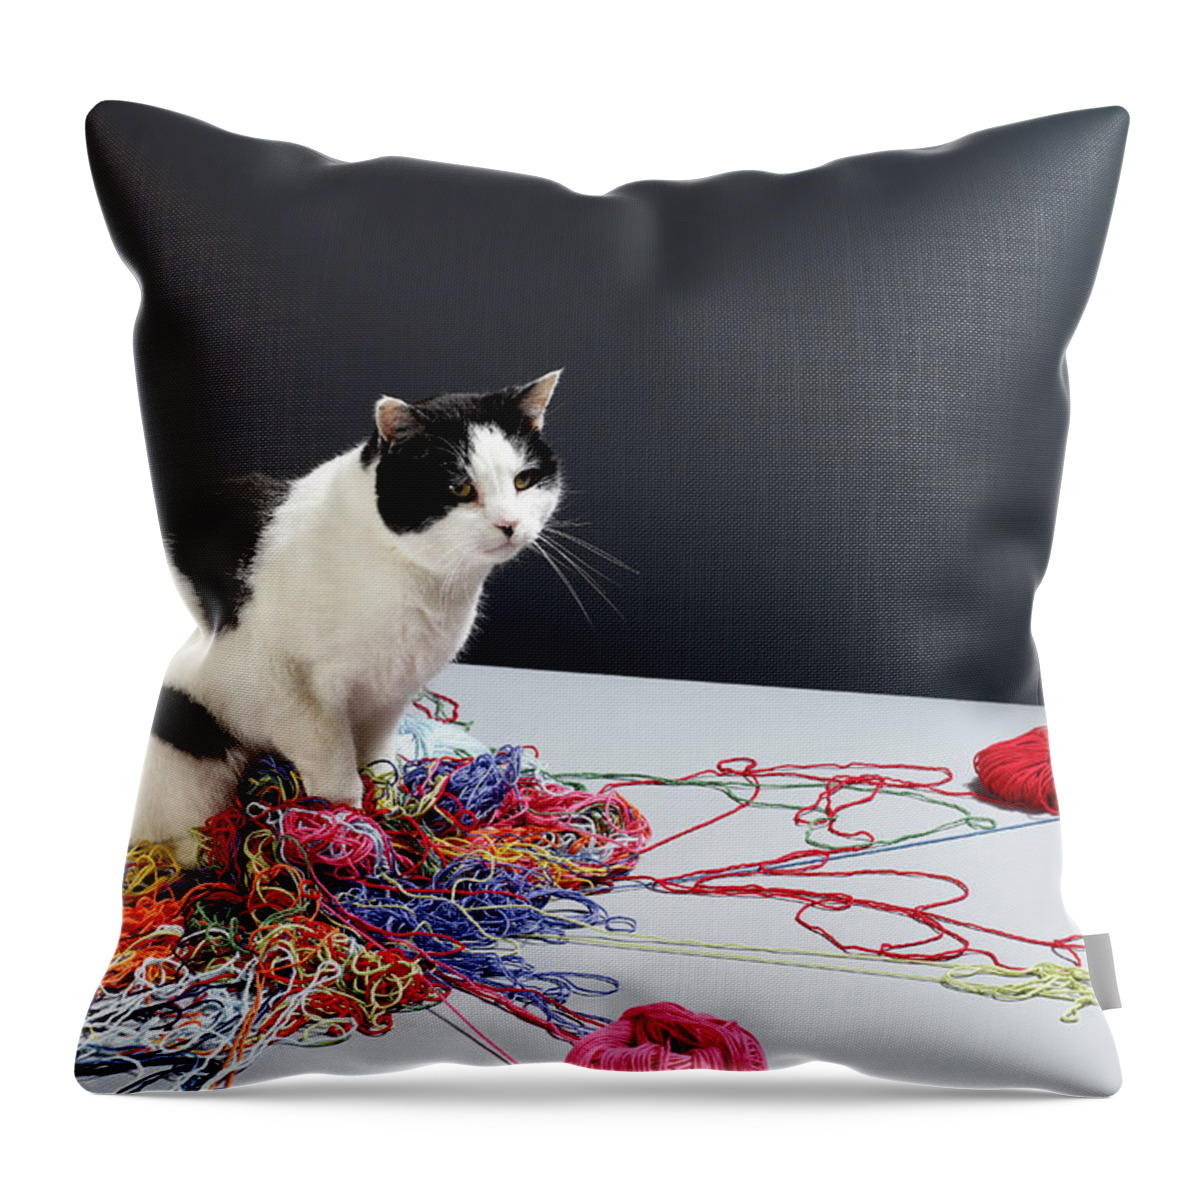 Pets Throw Pillow featuring the photograph Black And White Cat Sitting On Top Of by Michael Blann